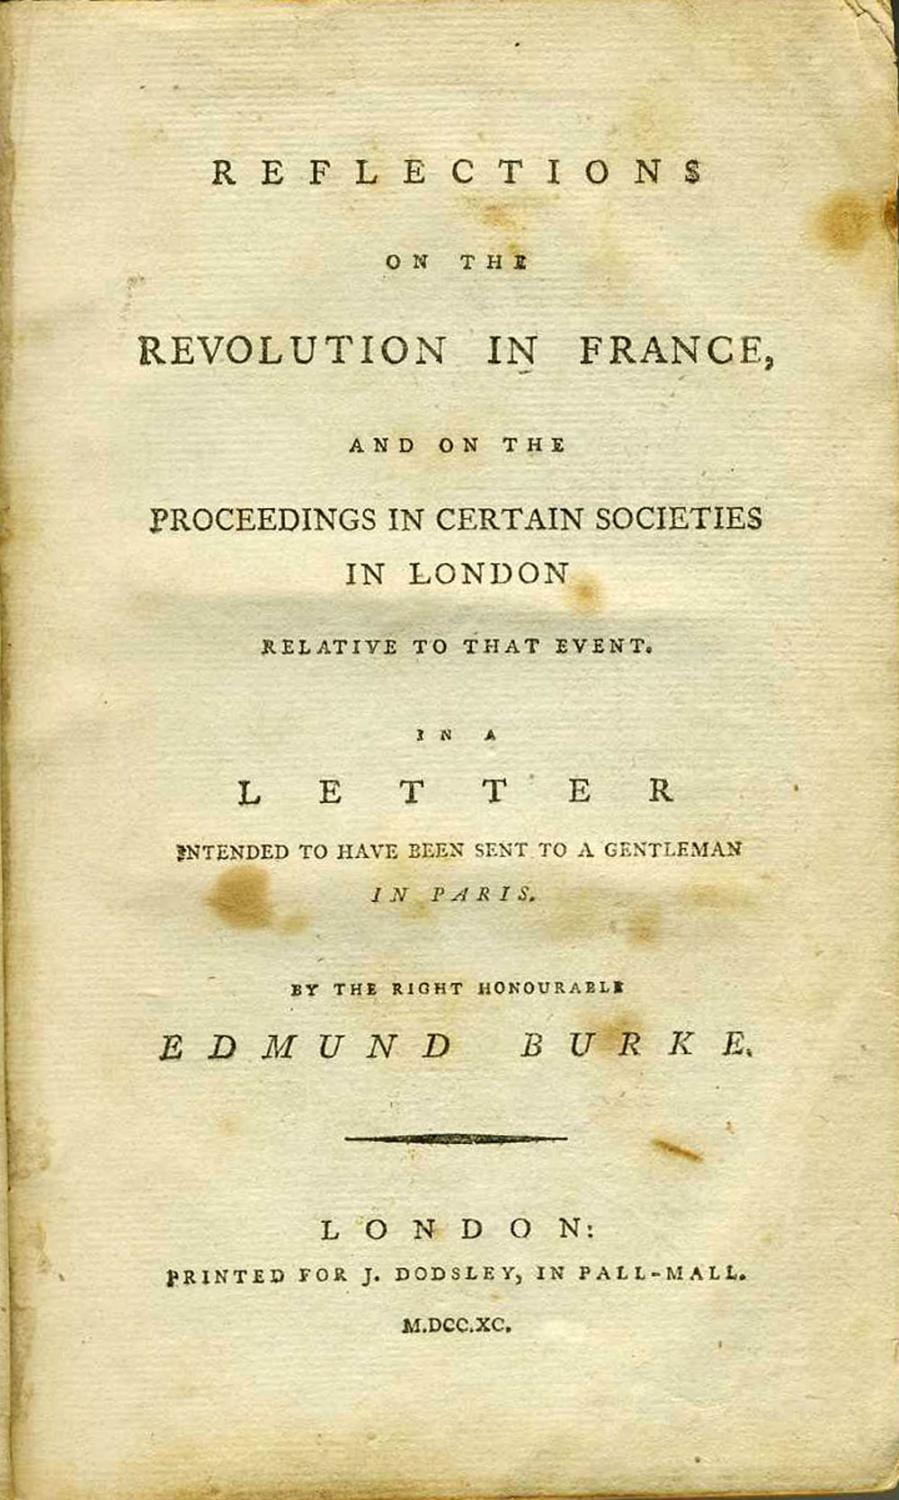 the　In　Relative　Paris　to　in　to　to　Proceedings　and　been　have　in　on　in　France,　that　Gentleman　Letter　on　a　Event.　Certain　a　Reflections　Societies　in　Sent　the　Intended　Revolution　London